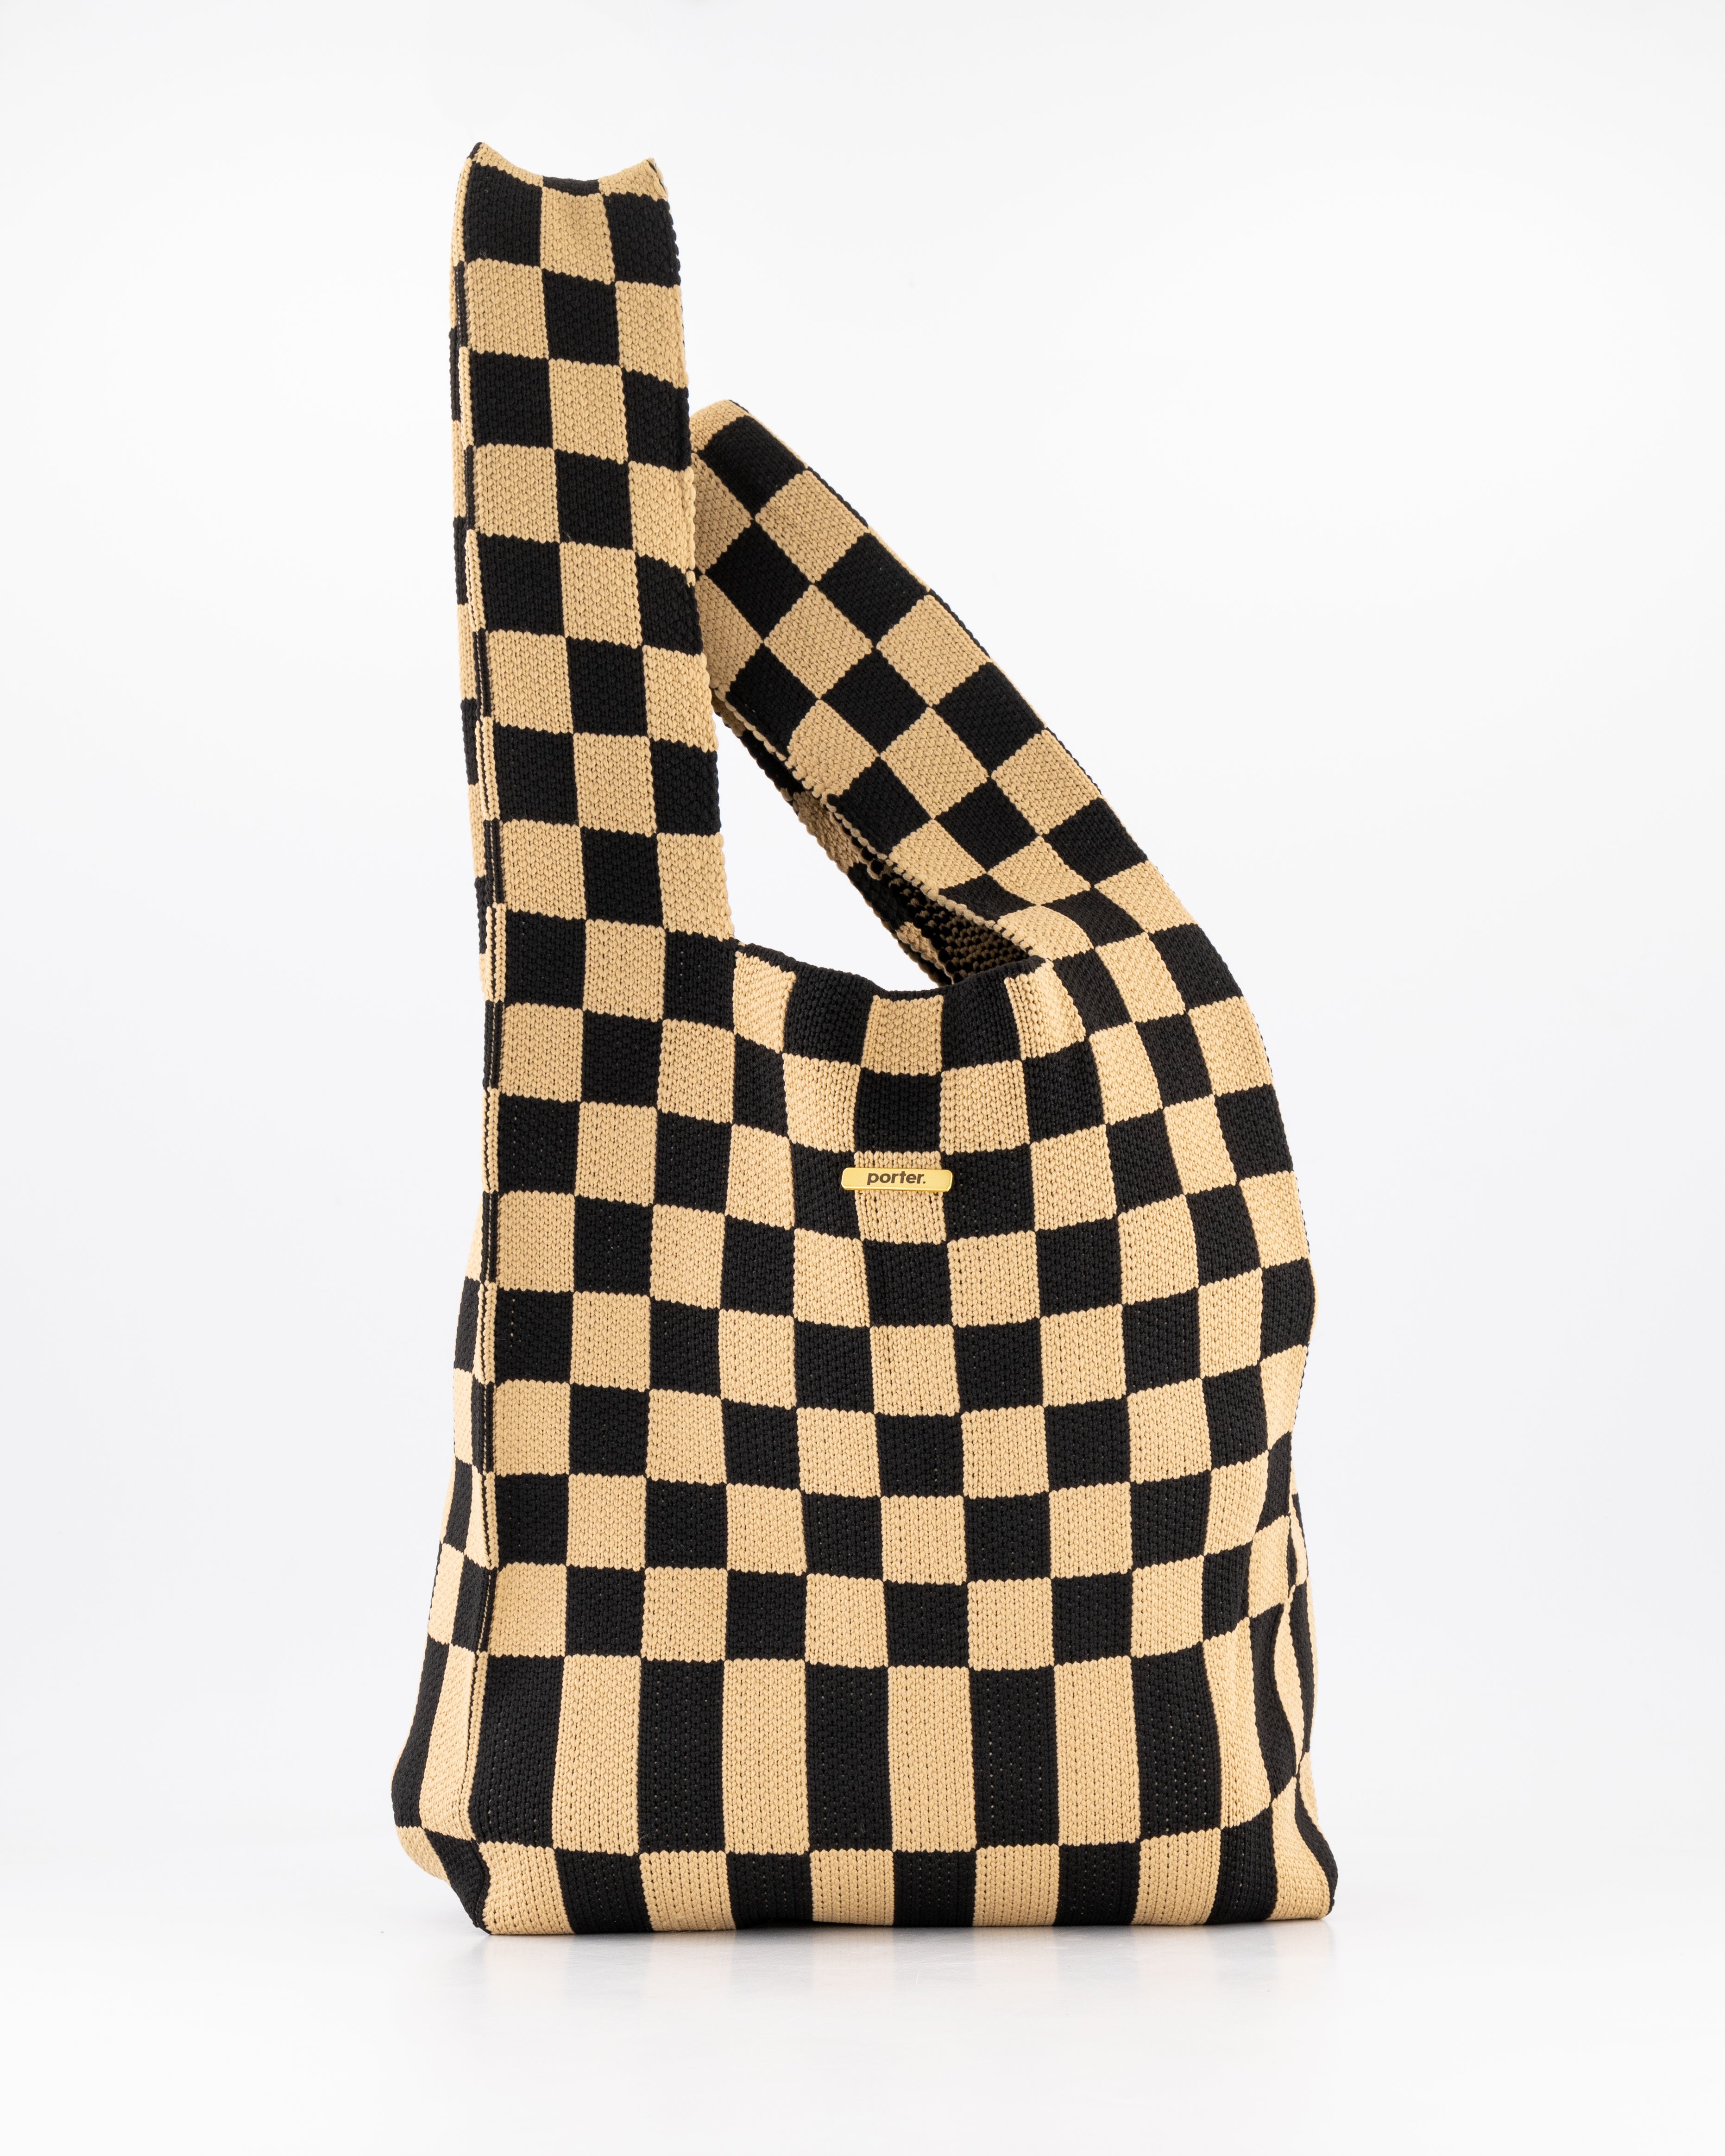 rose checkered tote